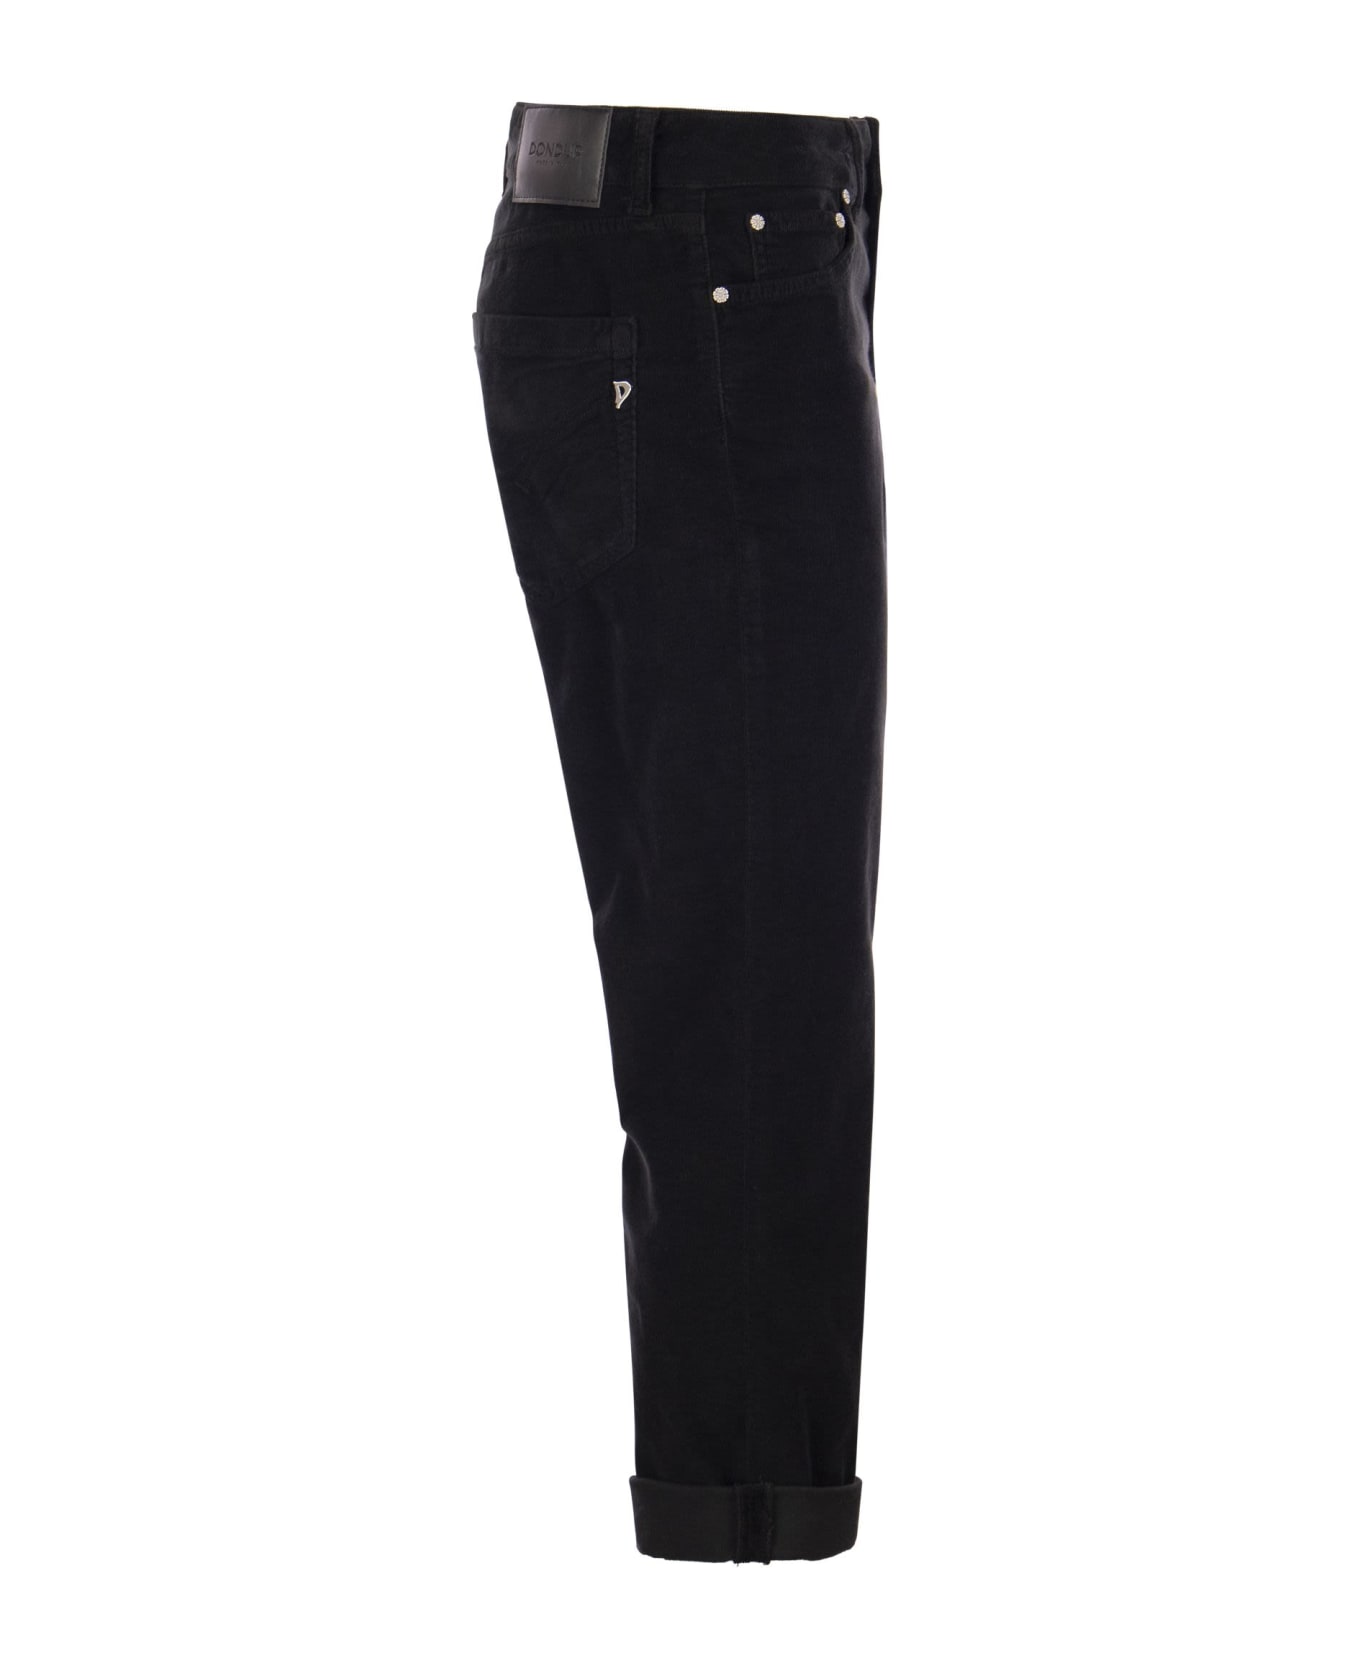 Dondup Koons - Multi-striped Velvet Trousers With Jewelled Buttons - Black